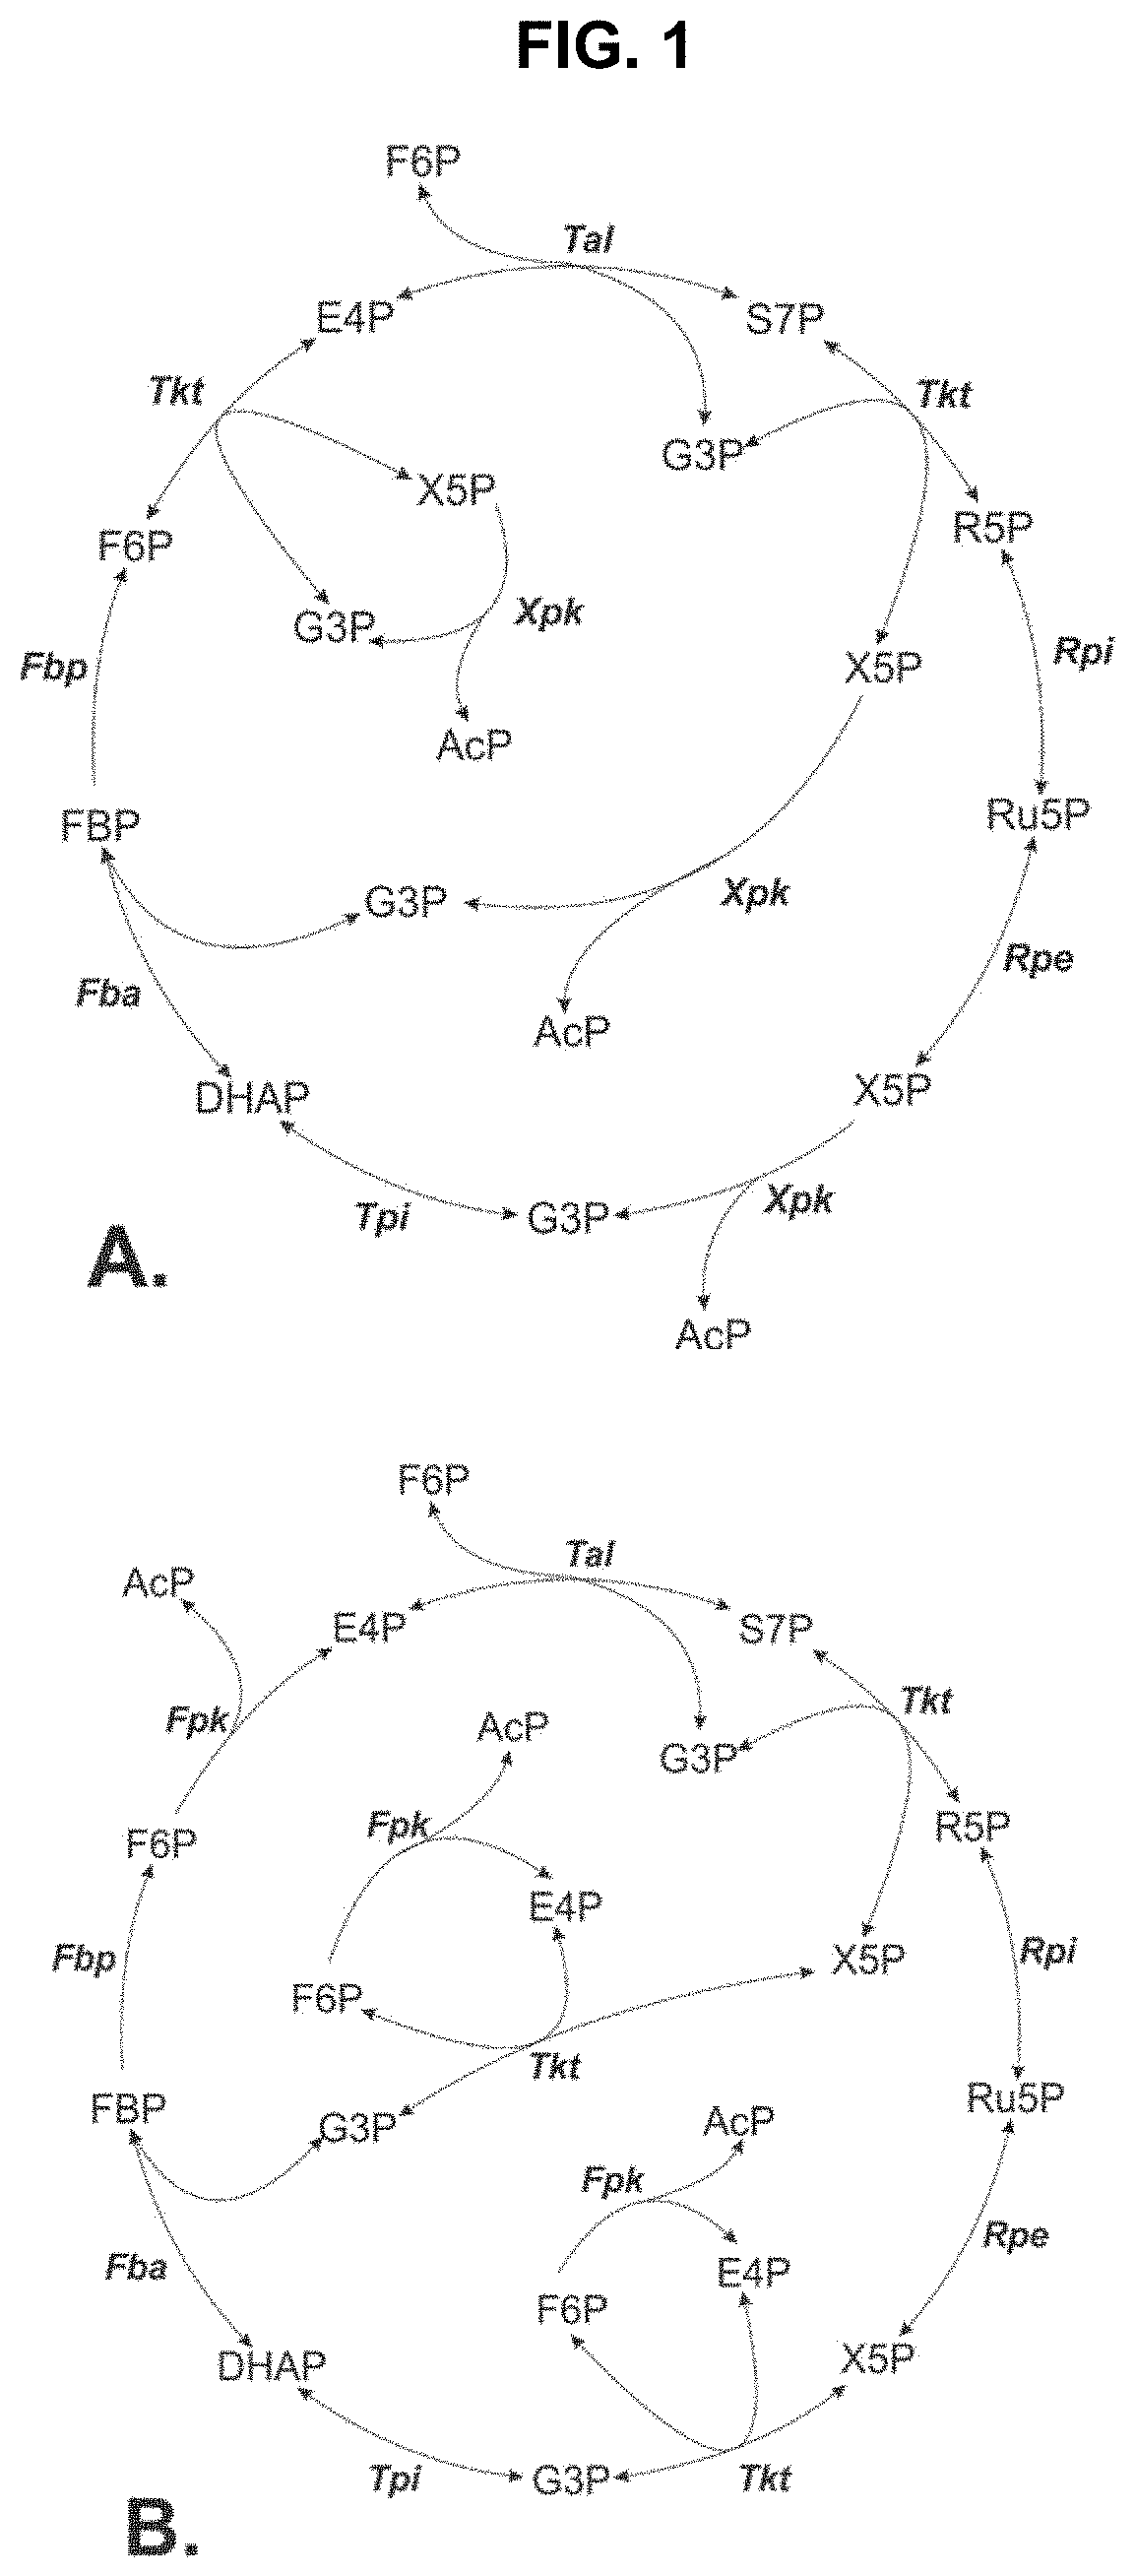 Metabolic Pathways with Increased Carbon Yield